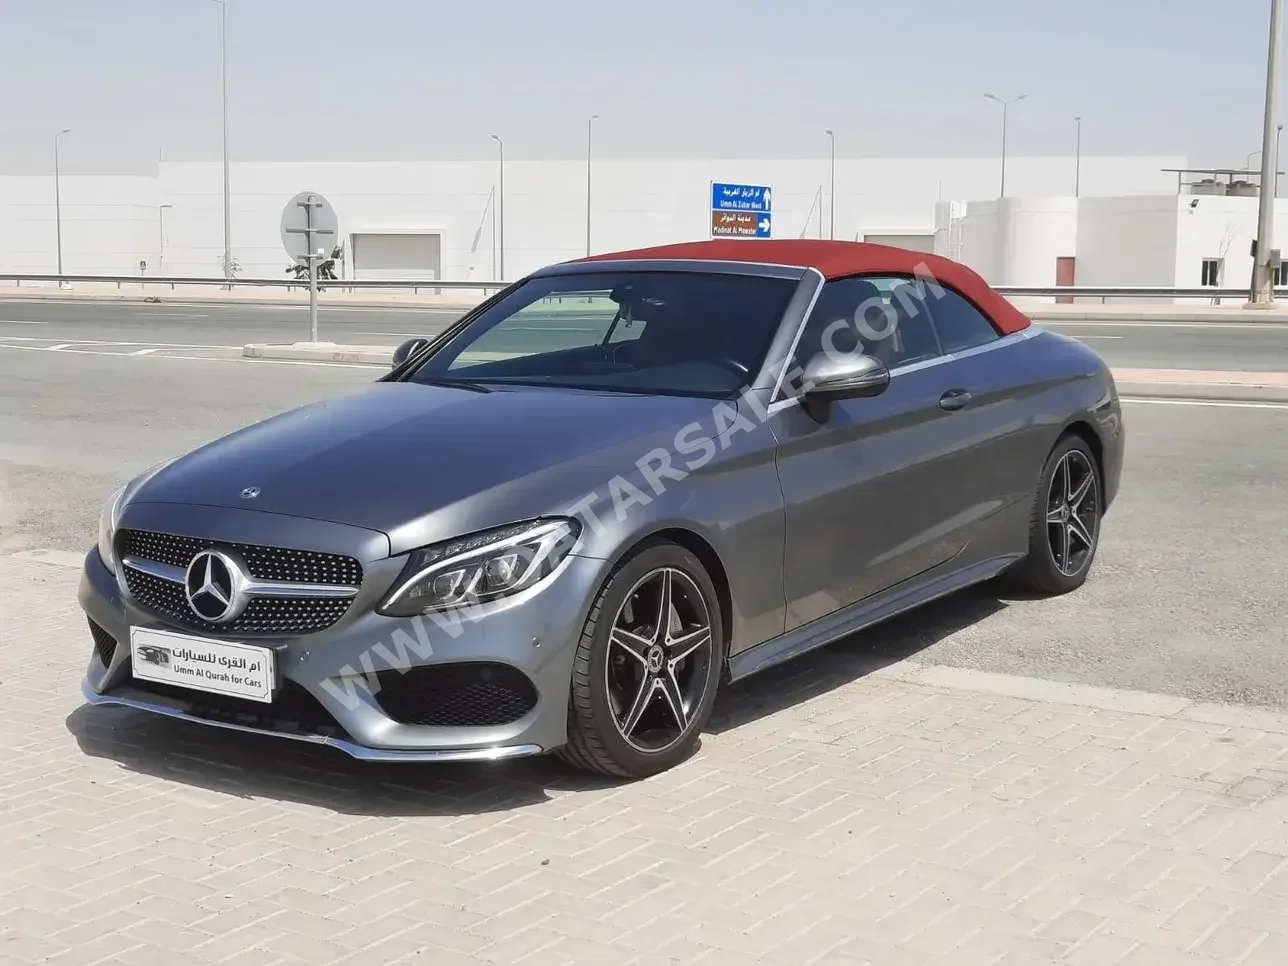 Mercedes-Benz  C-Class  300  2018  Automatic  69,000 Km  4 Cylinder  Rear Wheel Drive (RWD)  Coupe / Sport  Gray